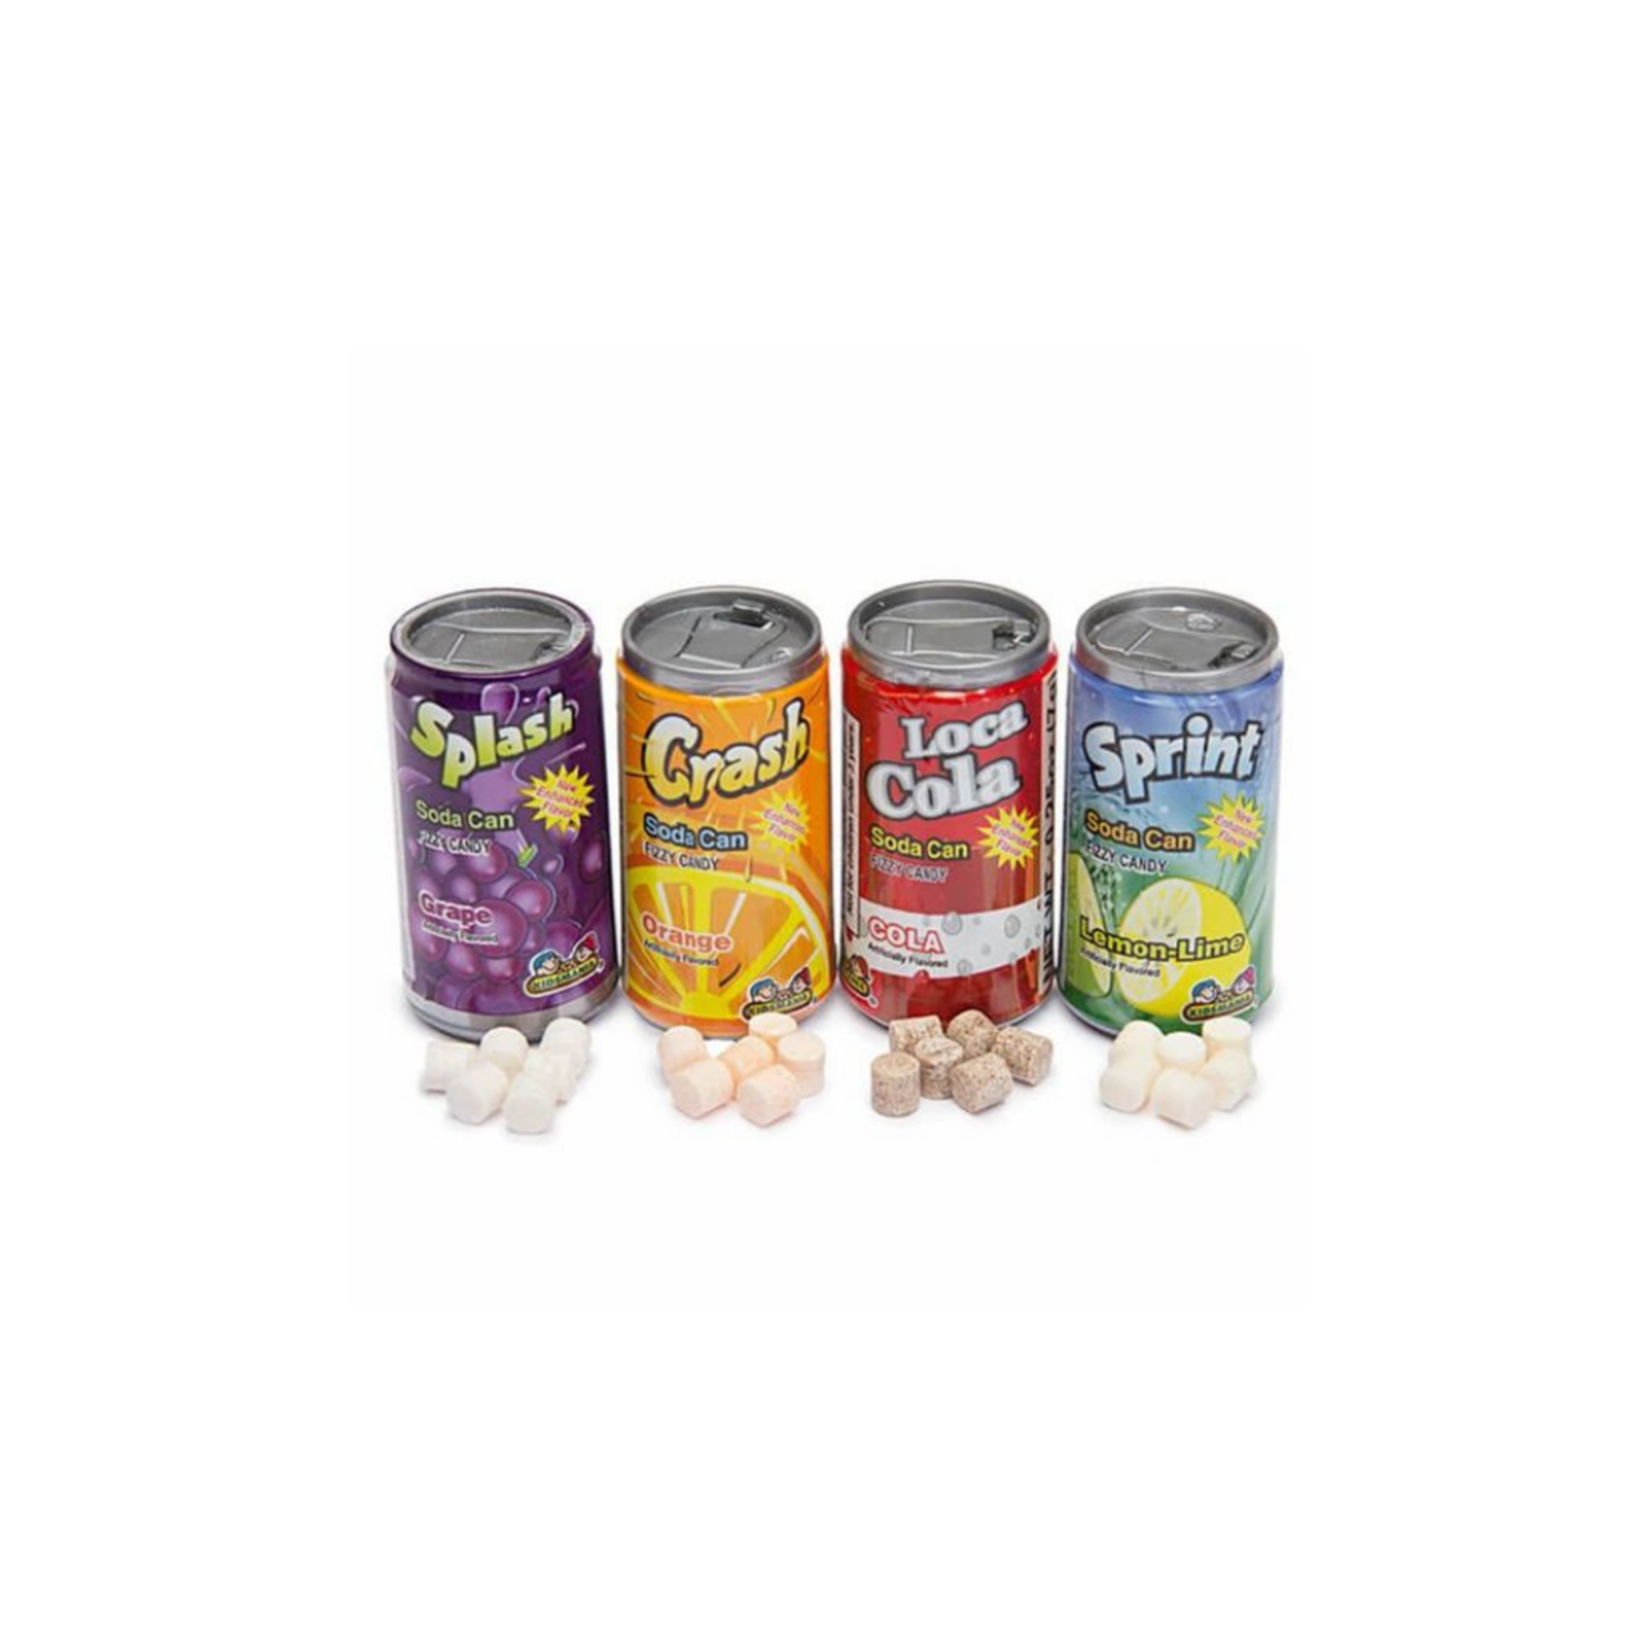 Kidsmania Soda Can 6 pack Fizzy Candy 12ct